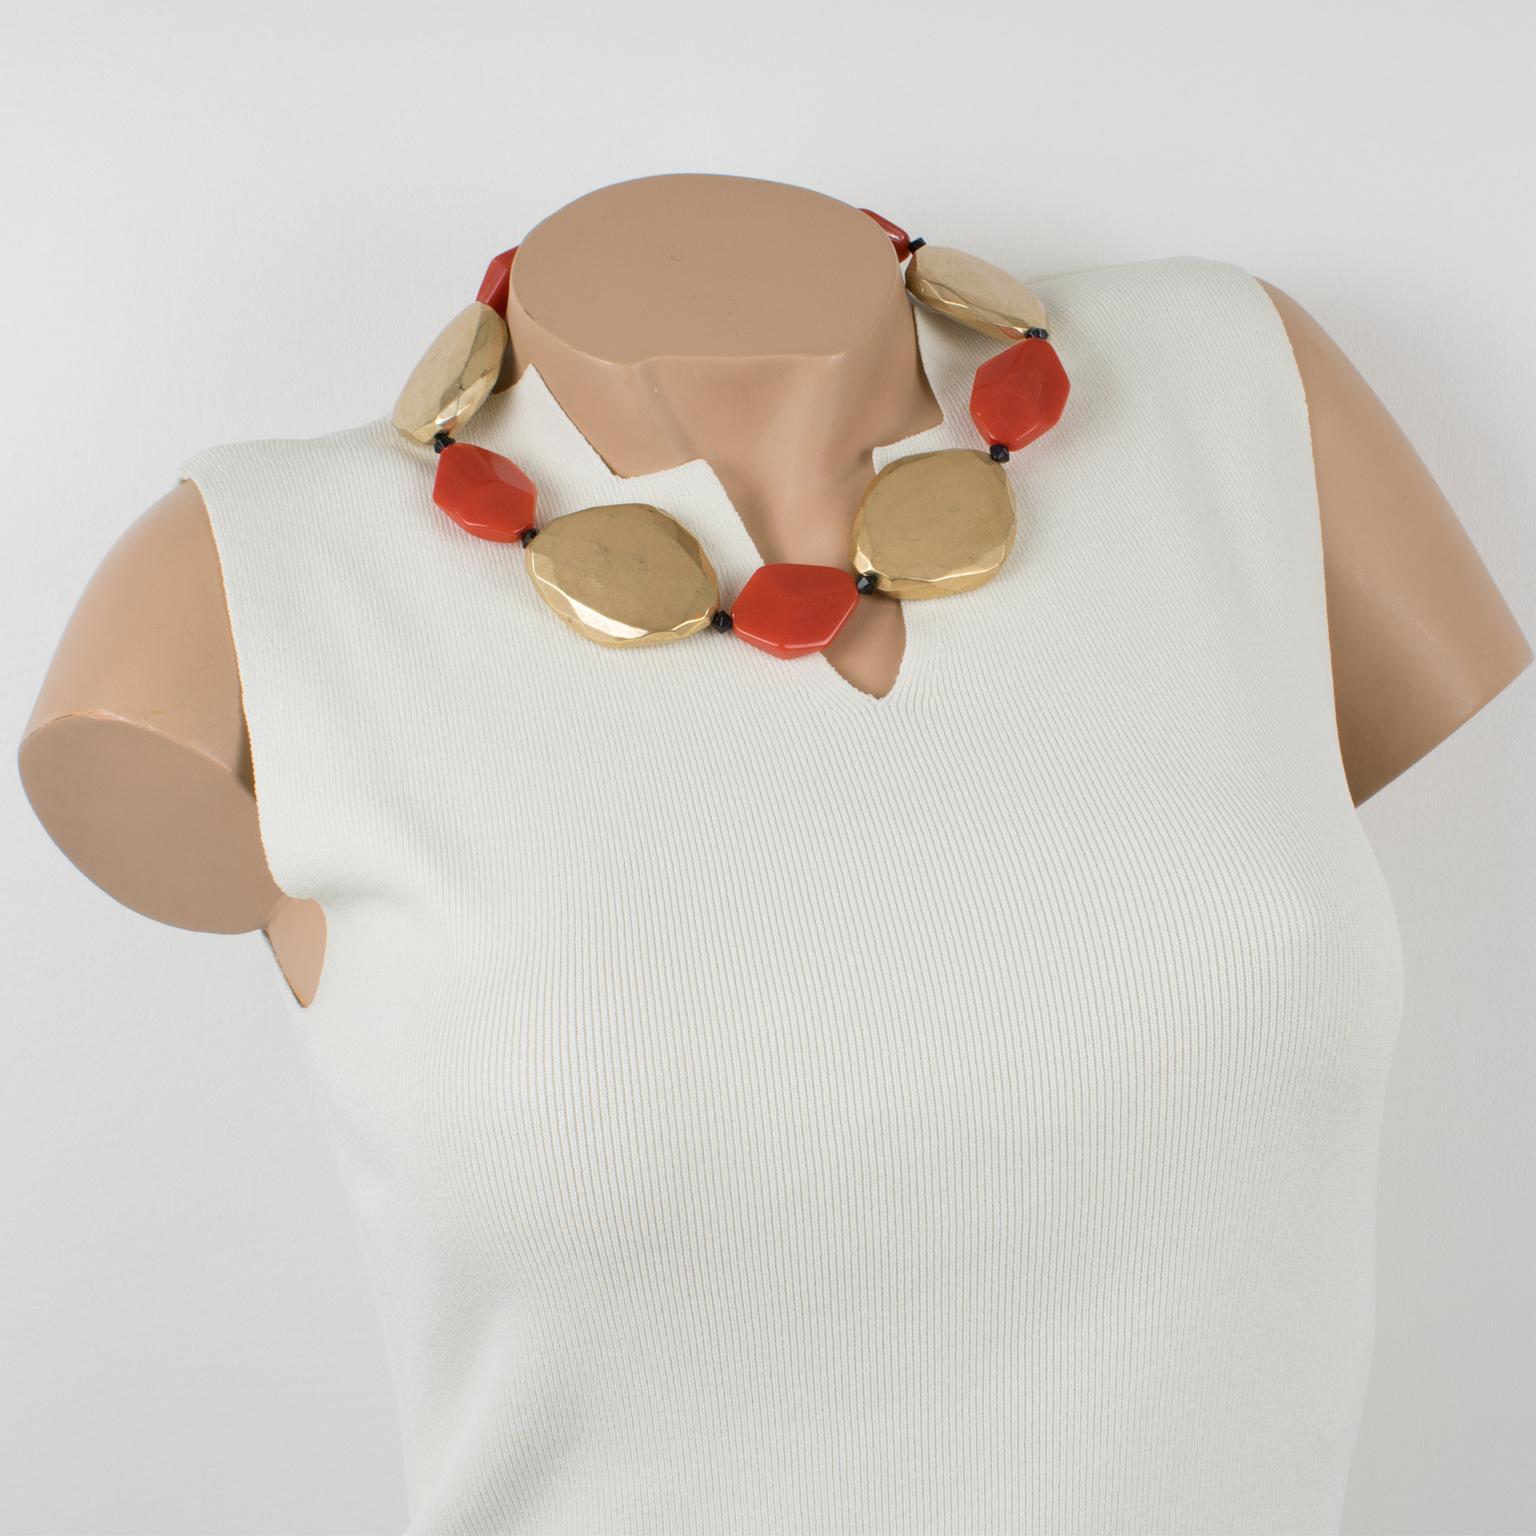 This refined Angela Caputi, made in Italy, resin choker necklace is built on the gilded metallic coating resin with burnt orange contrast. Each organic pebble bead is carved, dimensional, and geometric. Her matching of colors is always extremely